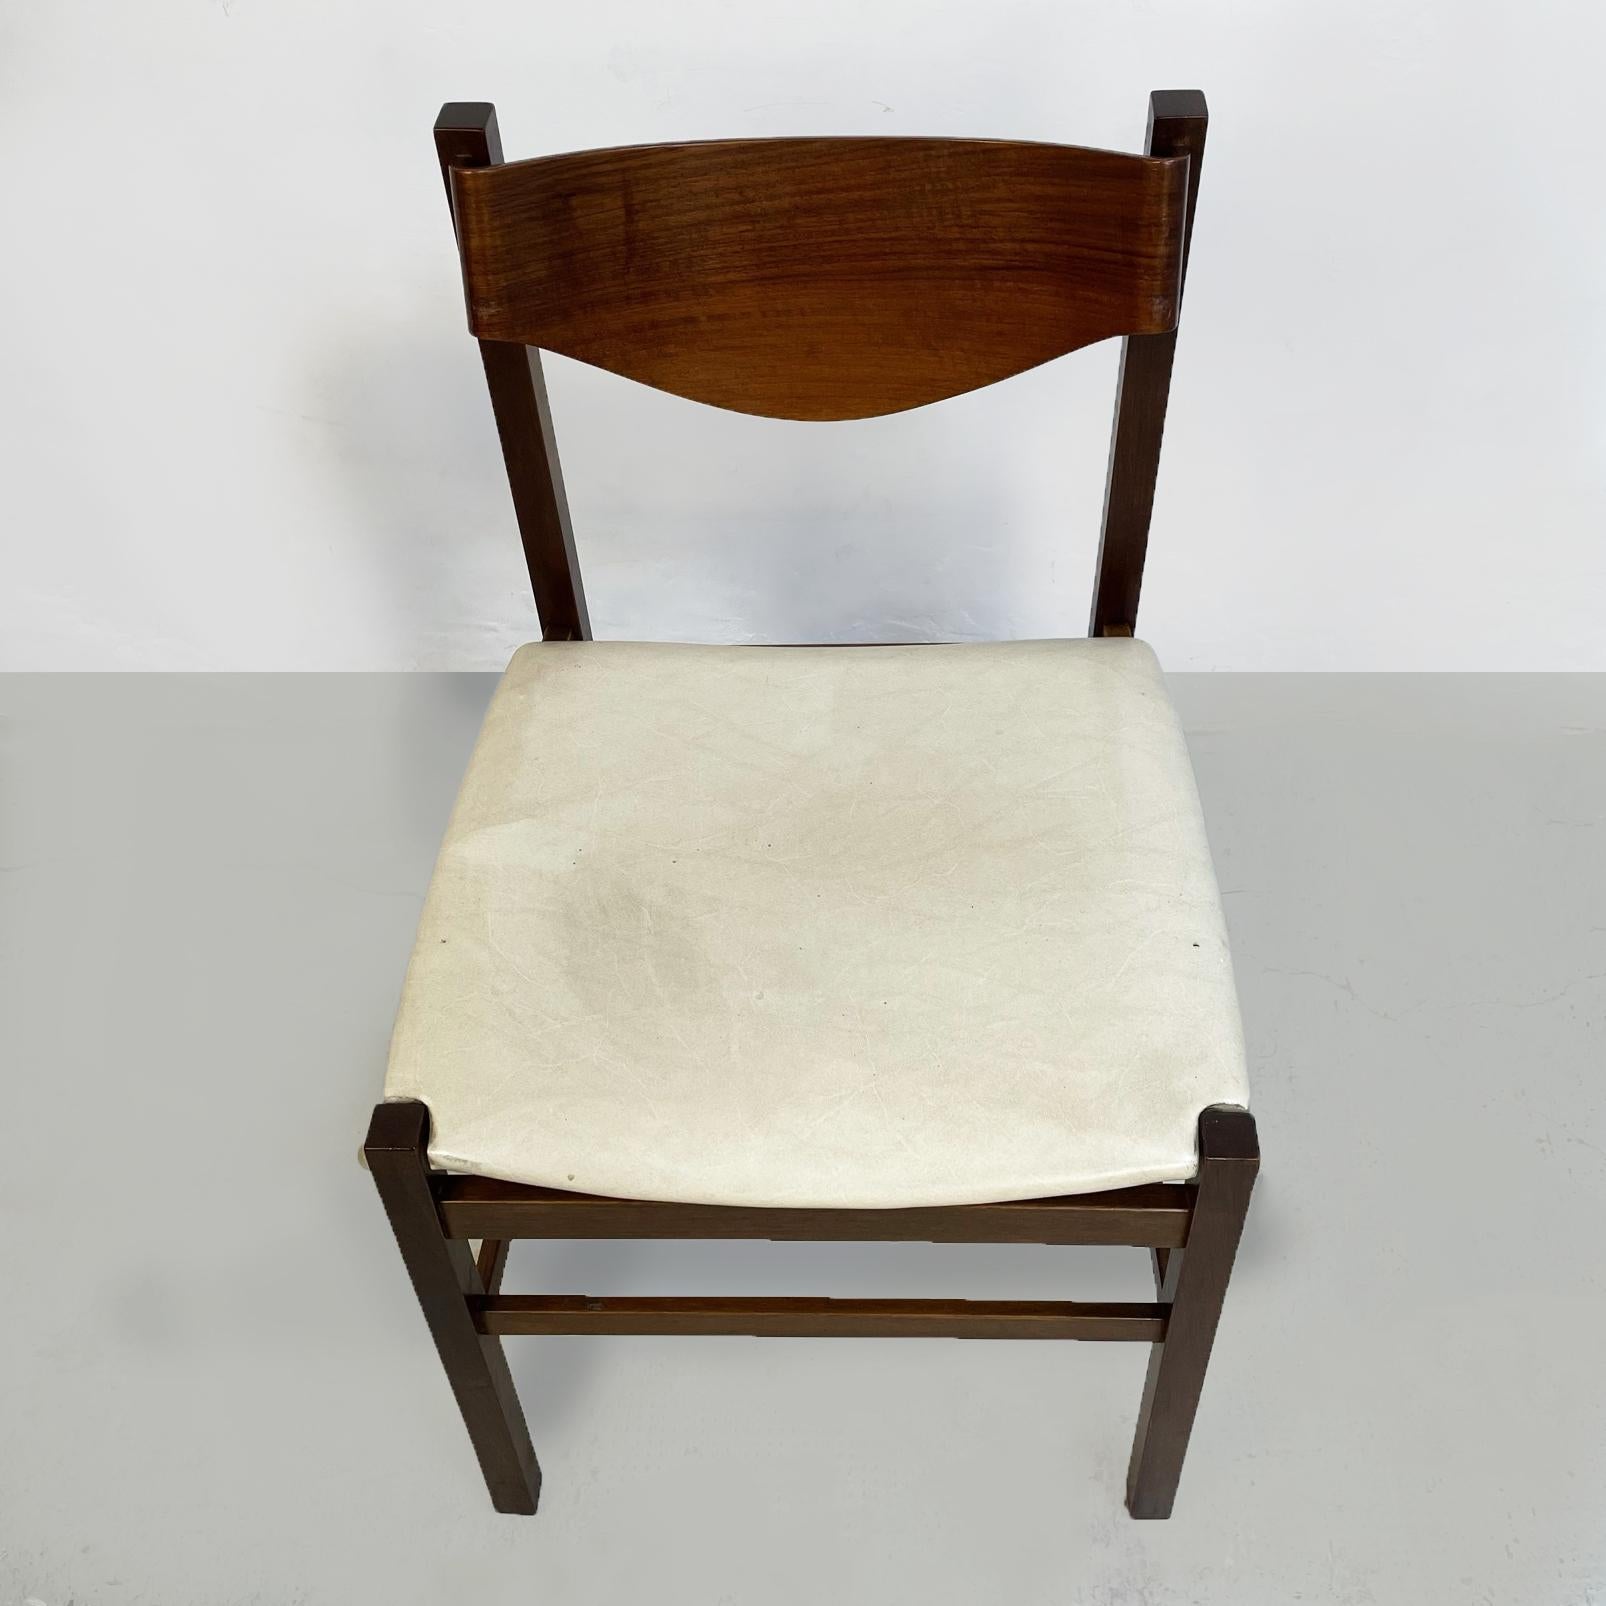 Italian Mid-Century Modern Wooden Chair with Leather Square Seat, 1960s For Sale 1